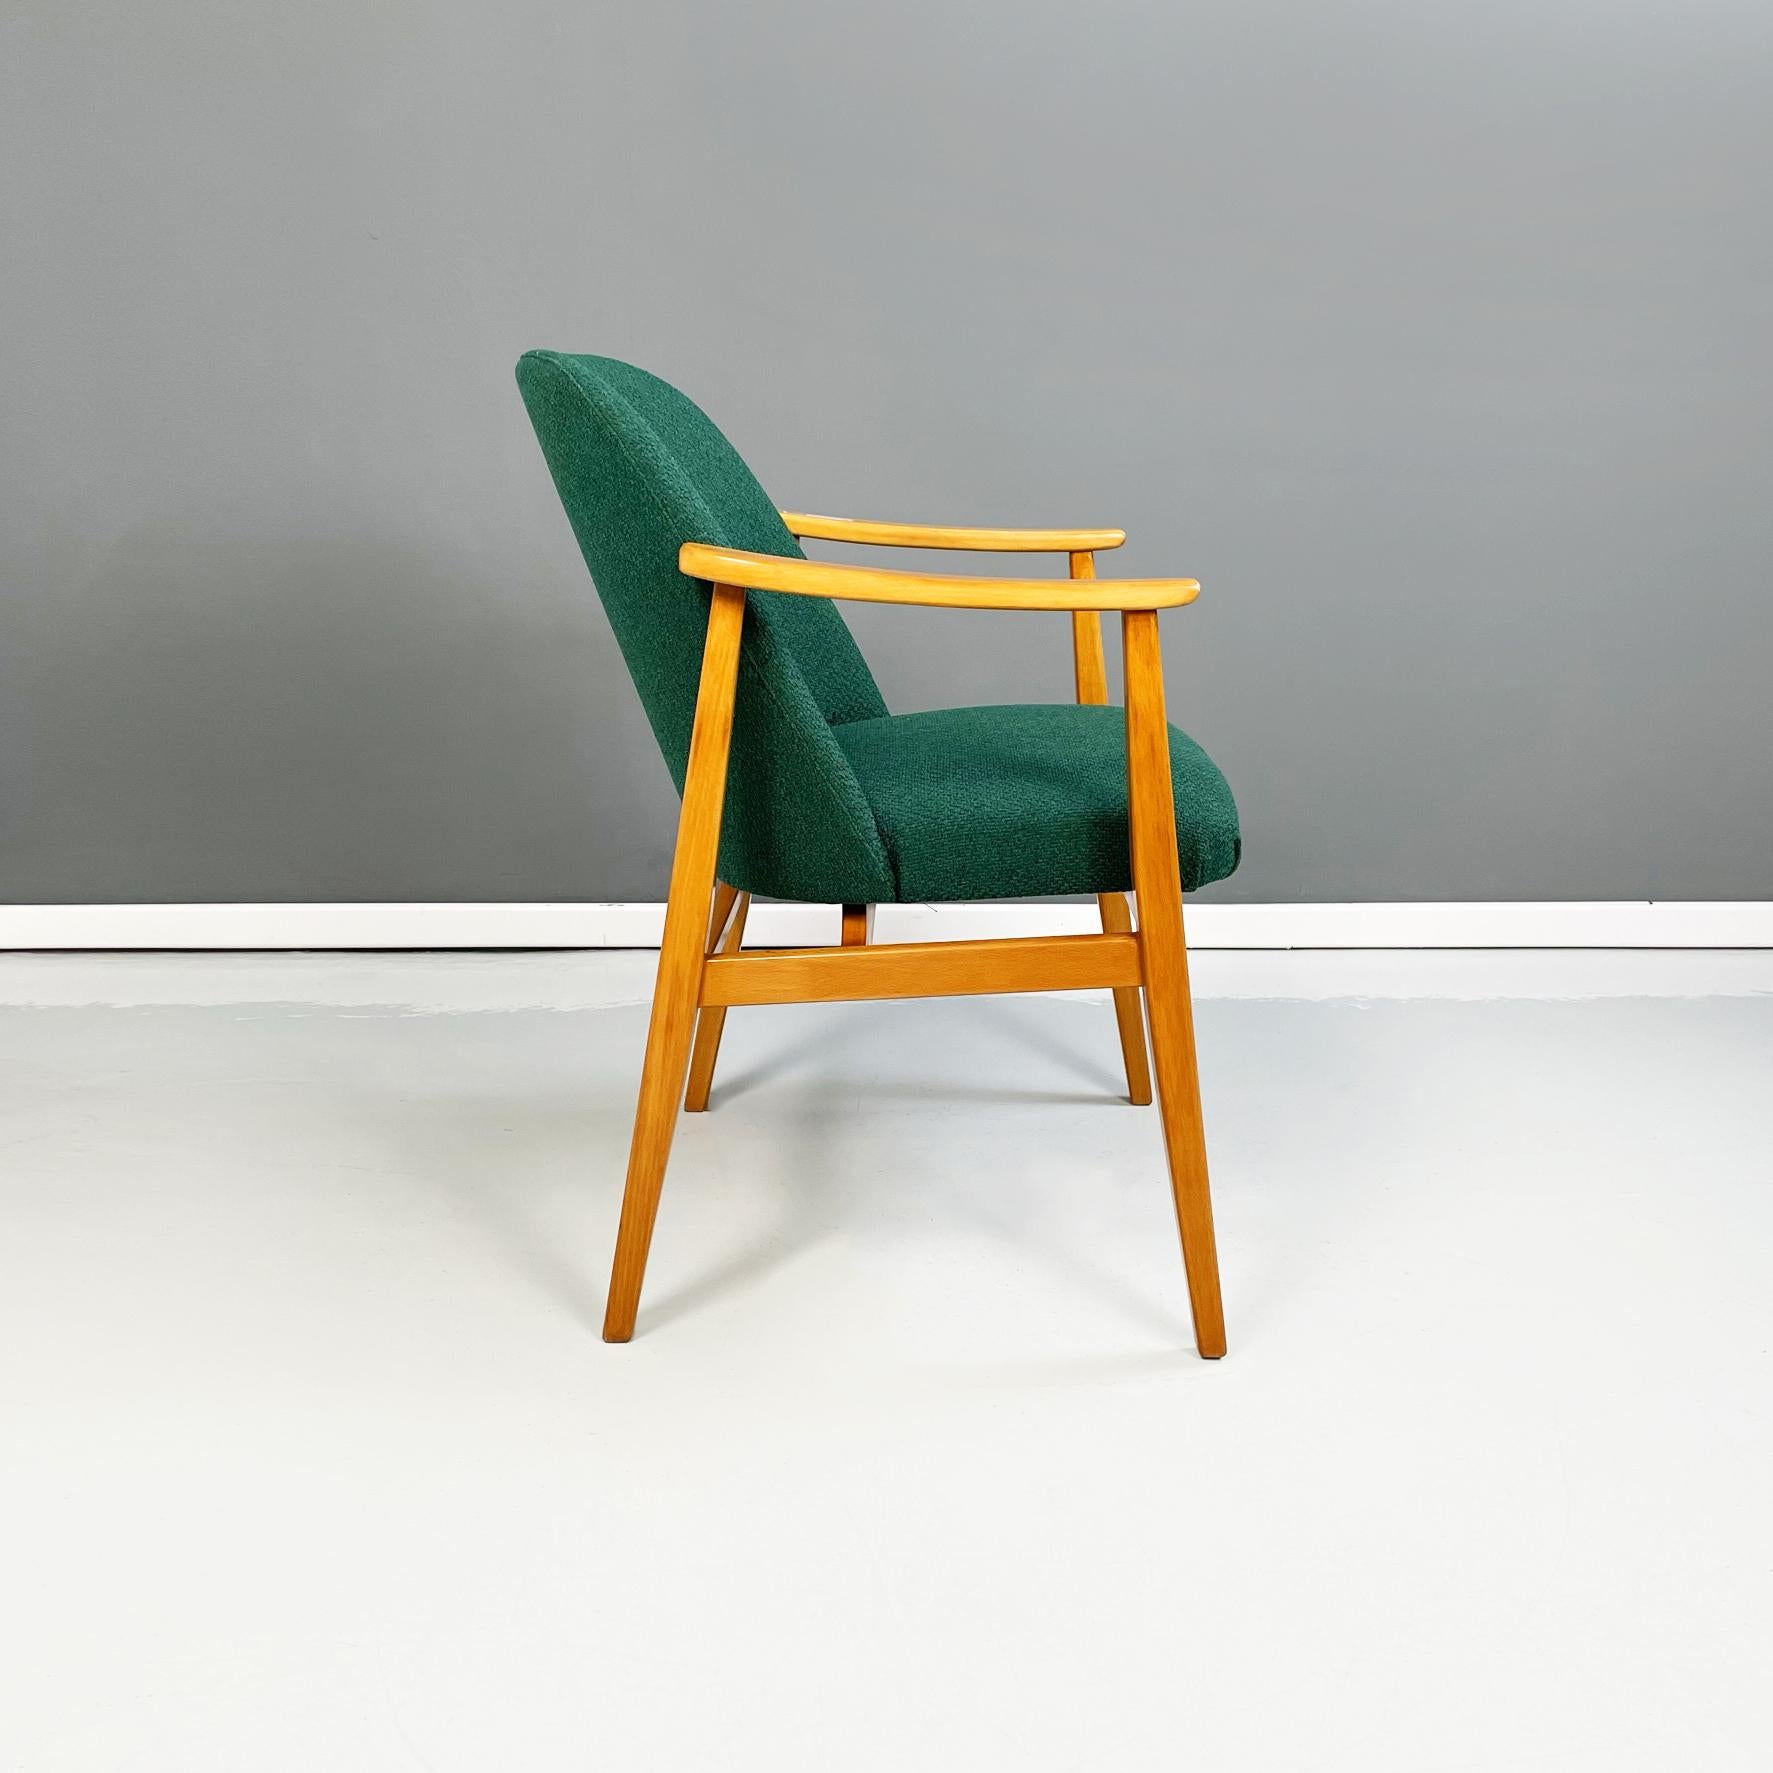 Danish Mid-Century Modern Armchairs in Forest Green Fabric and Wood, 1960s For Sale 1